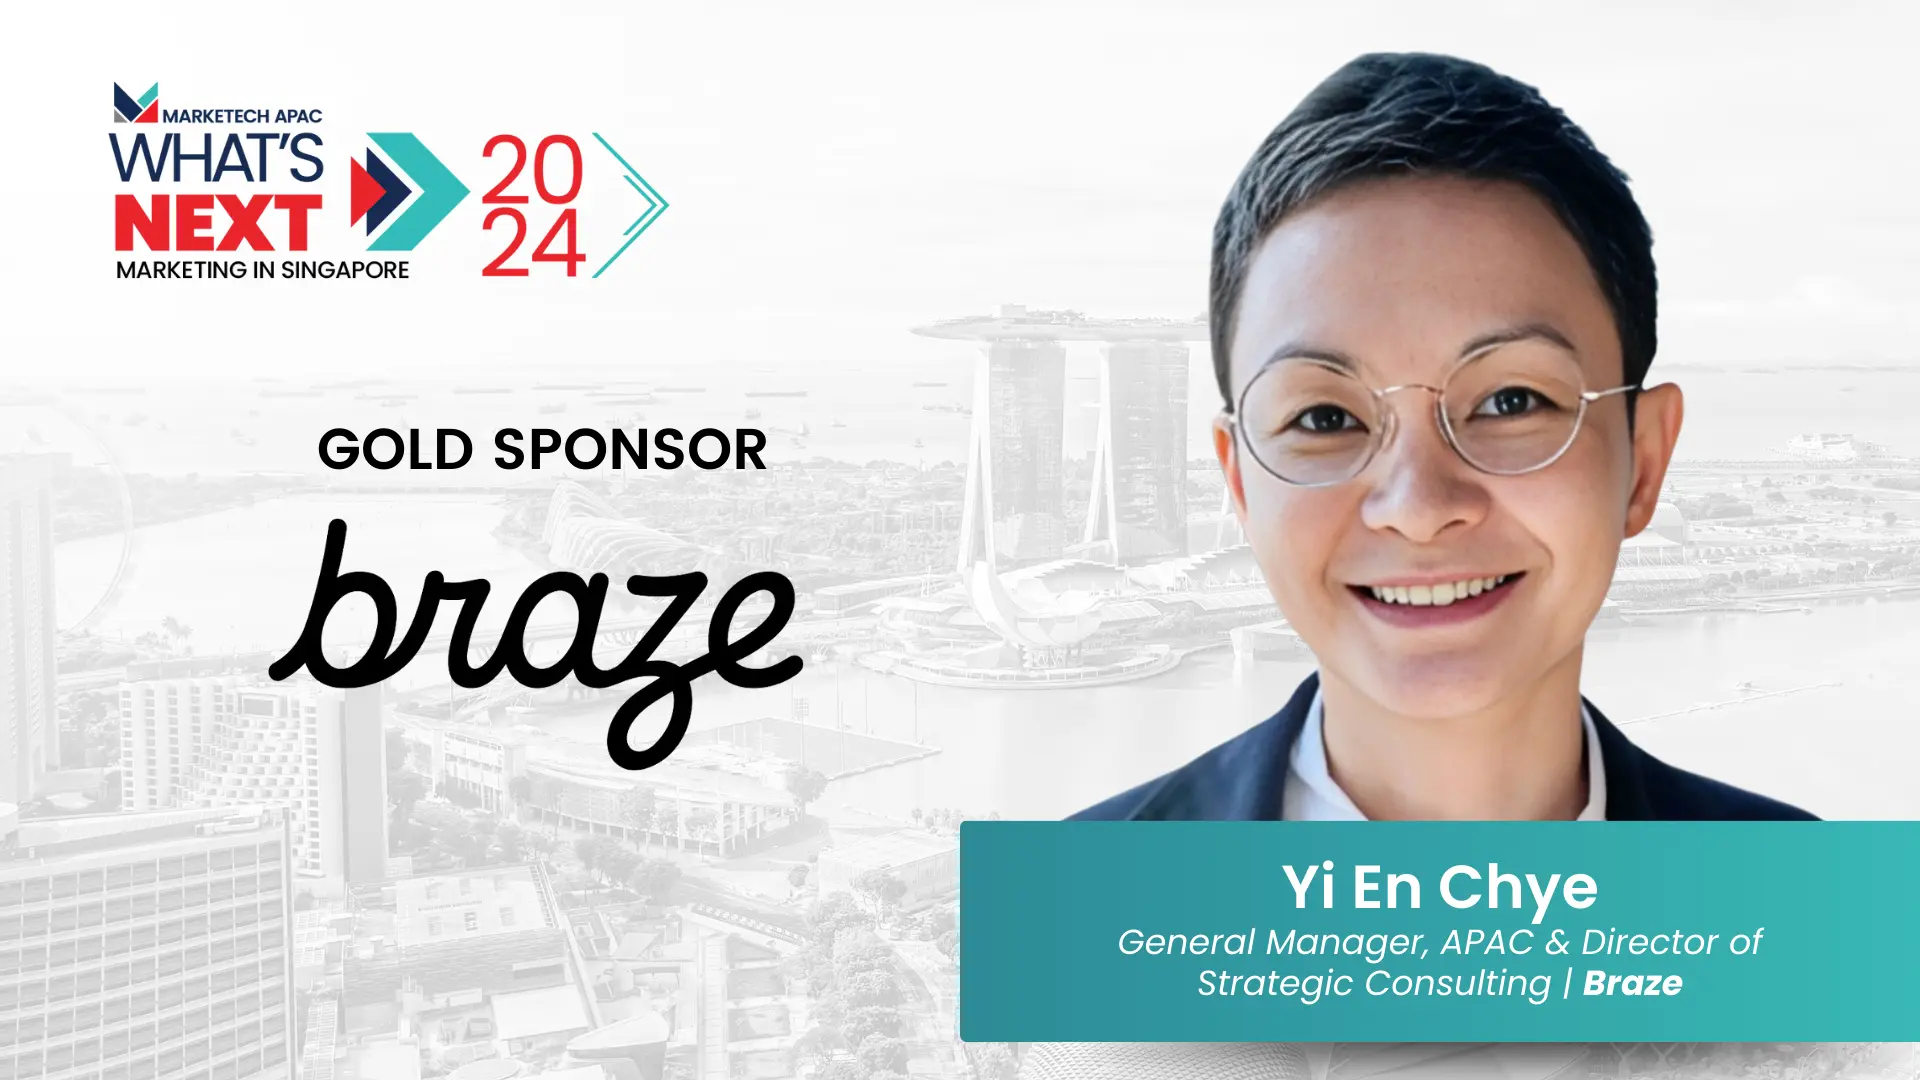 Braze joins as Gold Sponsor for “What’s NEXT 2024” conference in SG; to kick off discussion on transforming customer engagement with AI